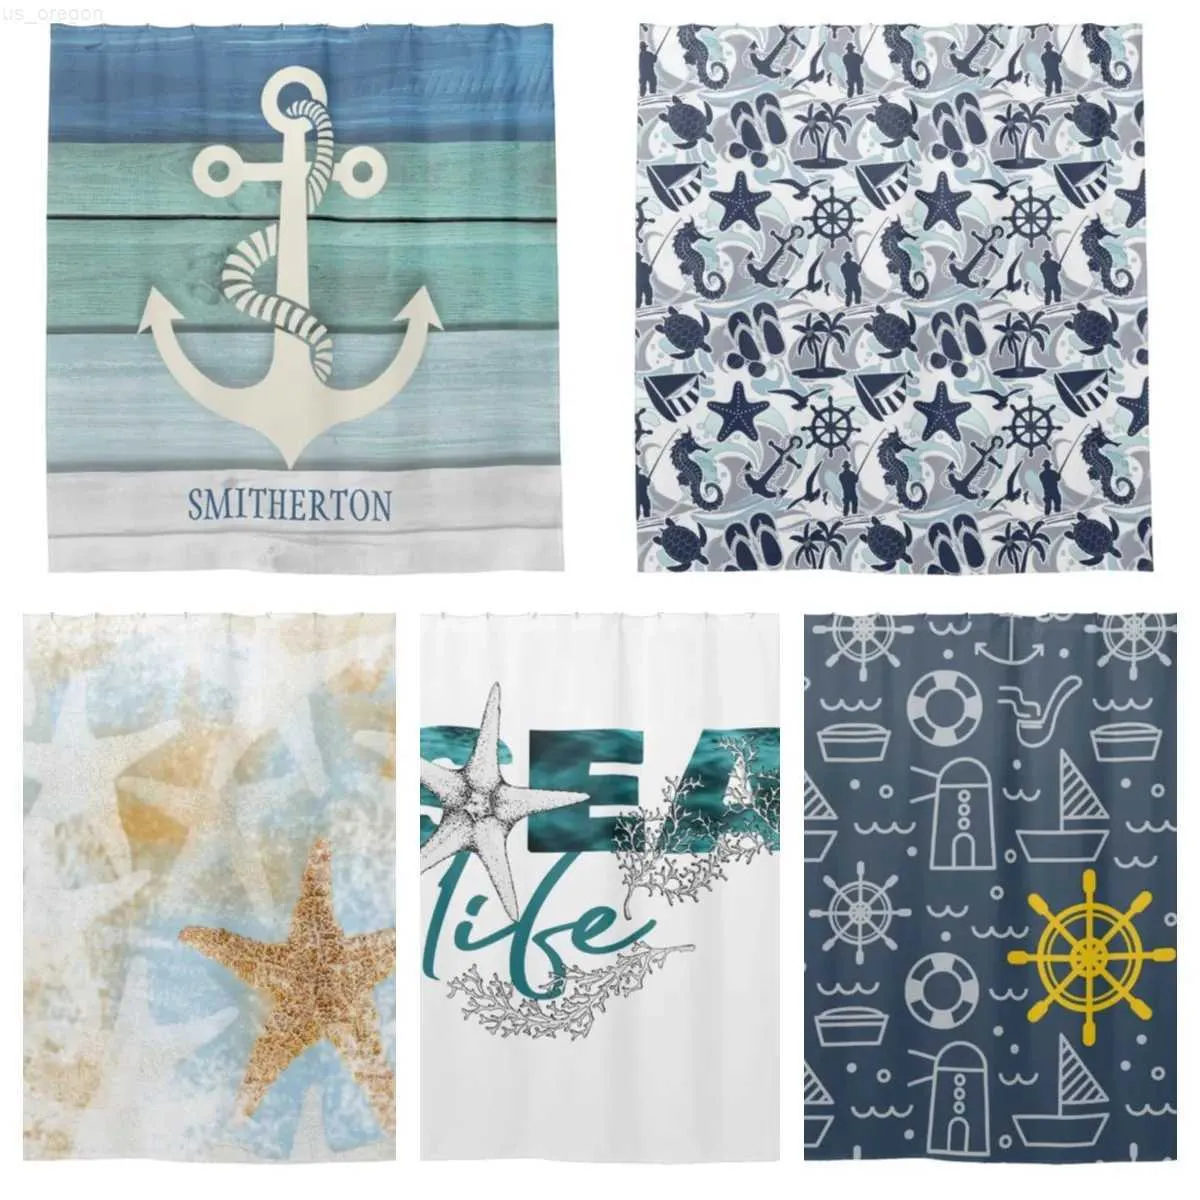 Shower Curtains Distressed wooden anchor retro marine life nautical theme shower curtain bathroom curtain with hook bathroom curtain l220cm